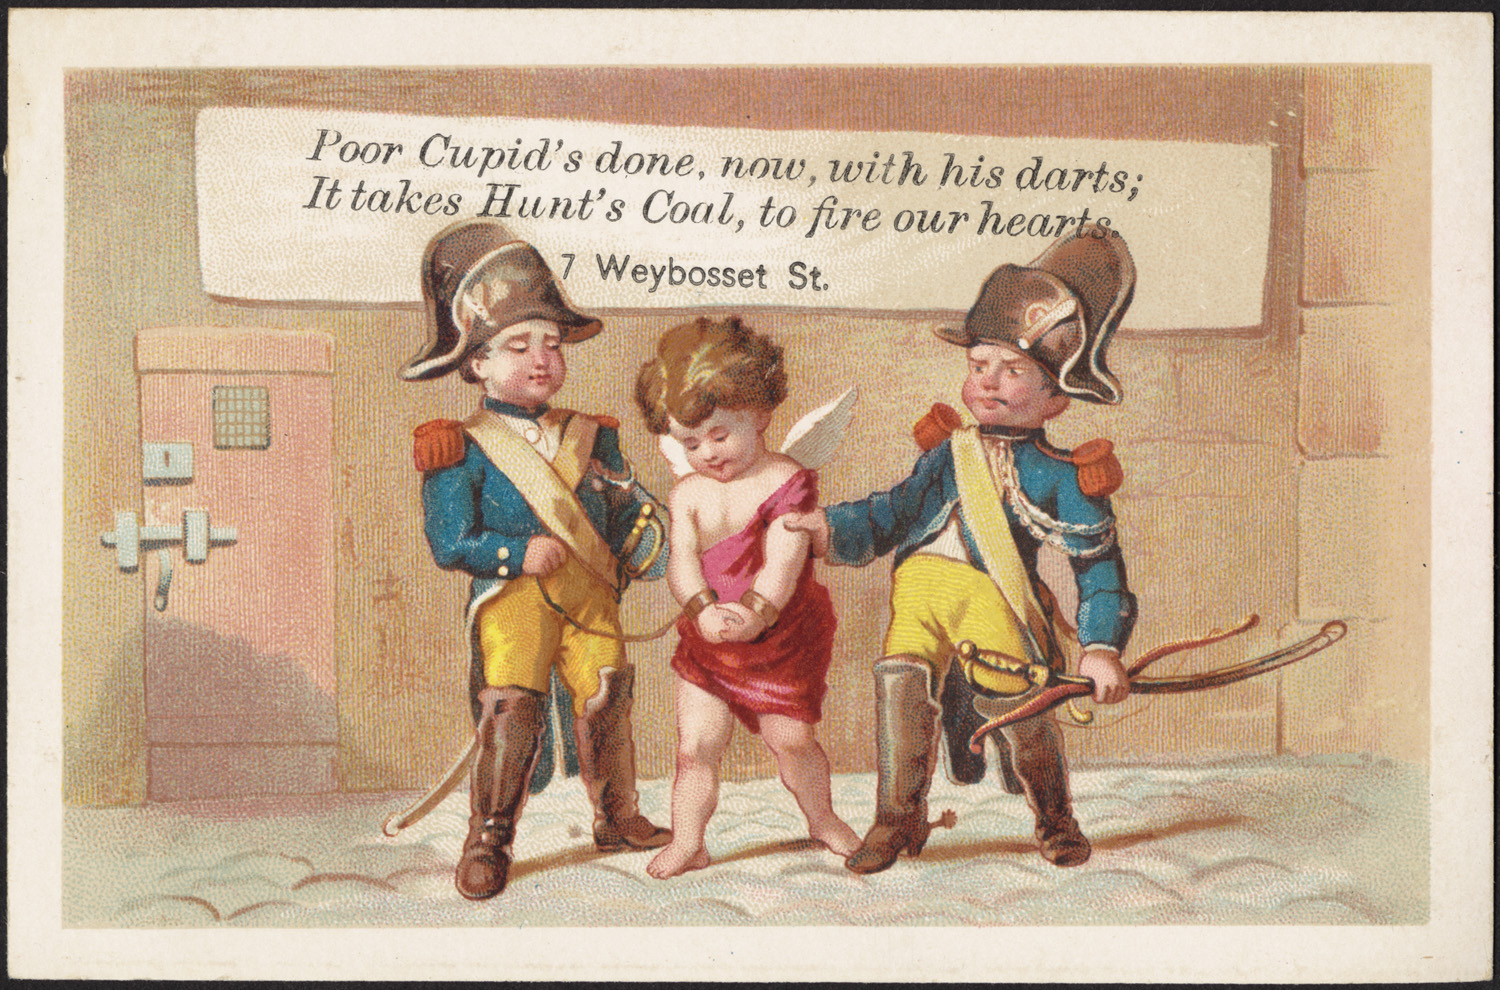 an old childrens ad with three little boys dressed as soldiers